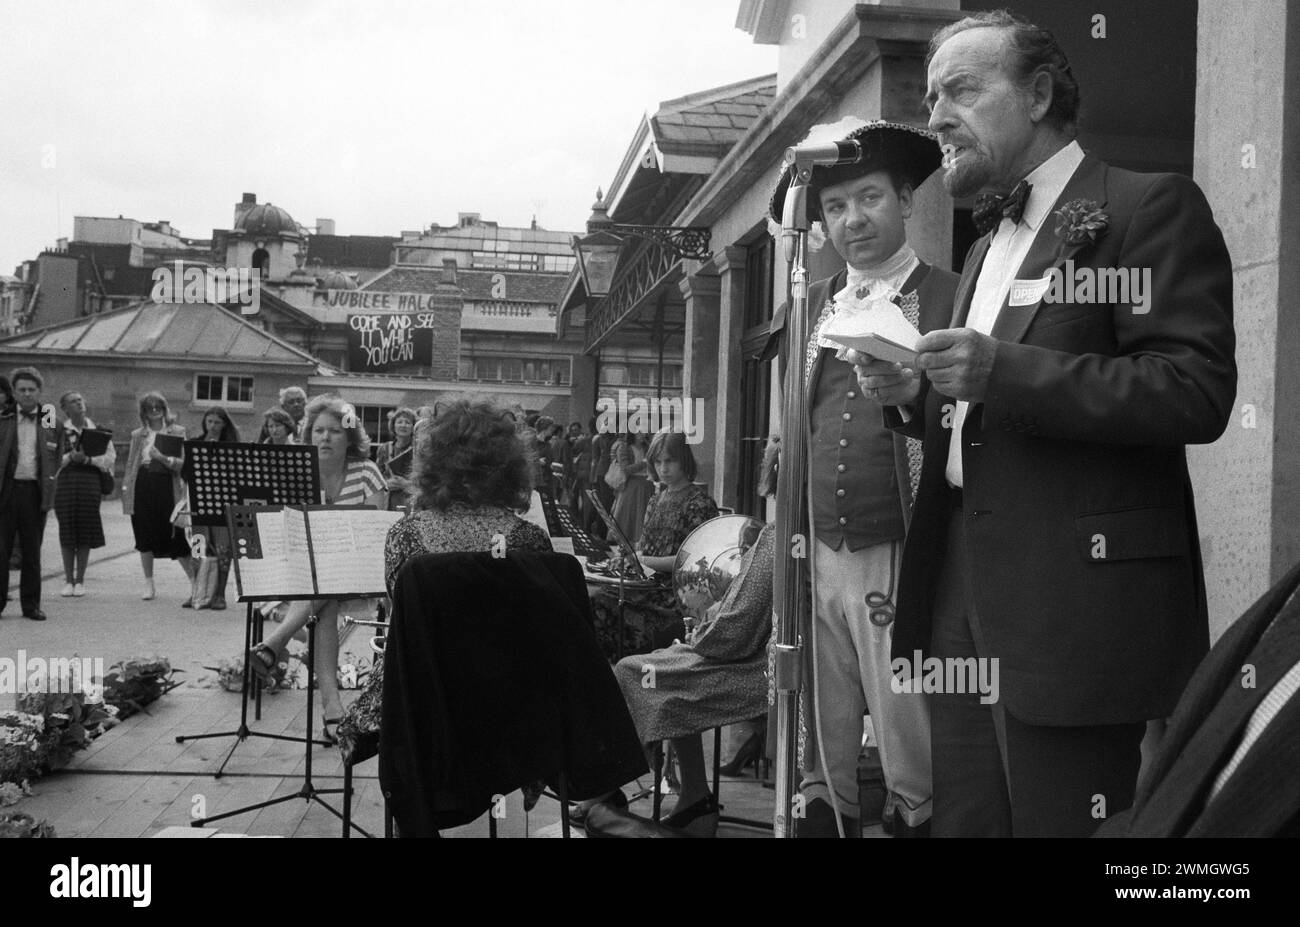 Sir Horace Cutler. Opening of the new Covent Garden Piazza in the old Covent Garden Market, London, 19th June 1980. UK 1980s HOMER SYKES Stock Photo